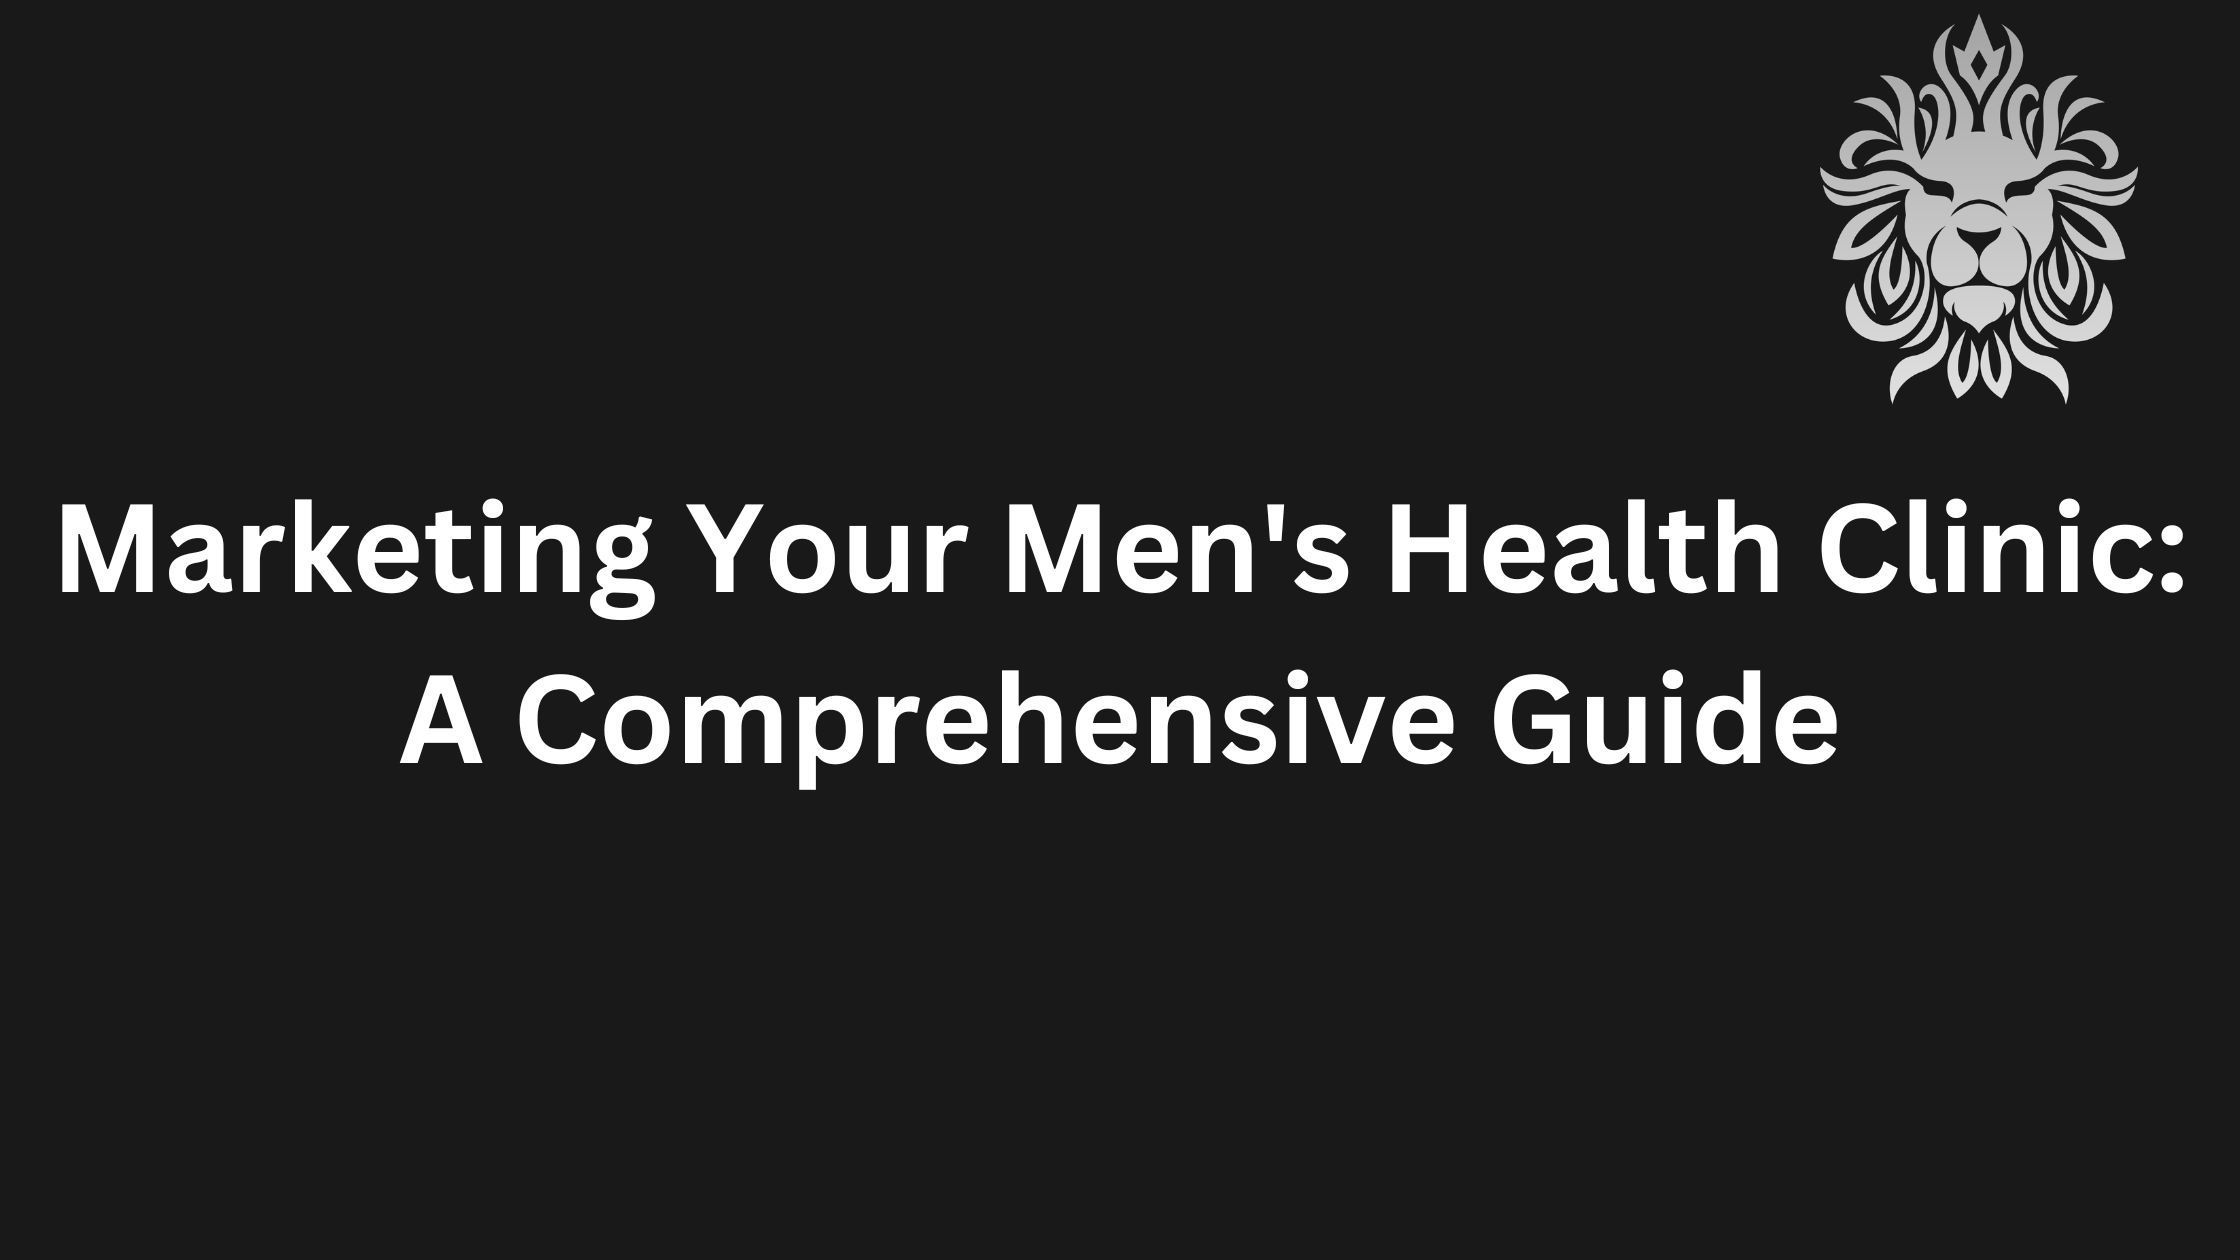 Marketing Your Men’s Health Clinic: A Comprehensive Guide